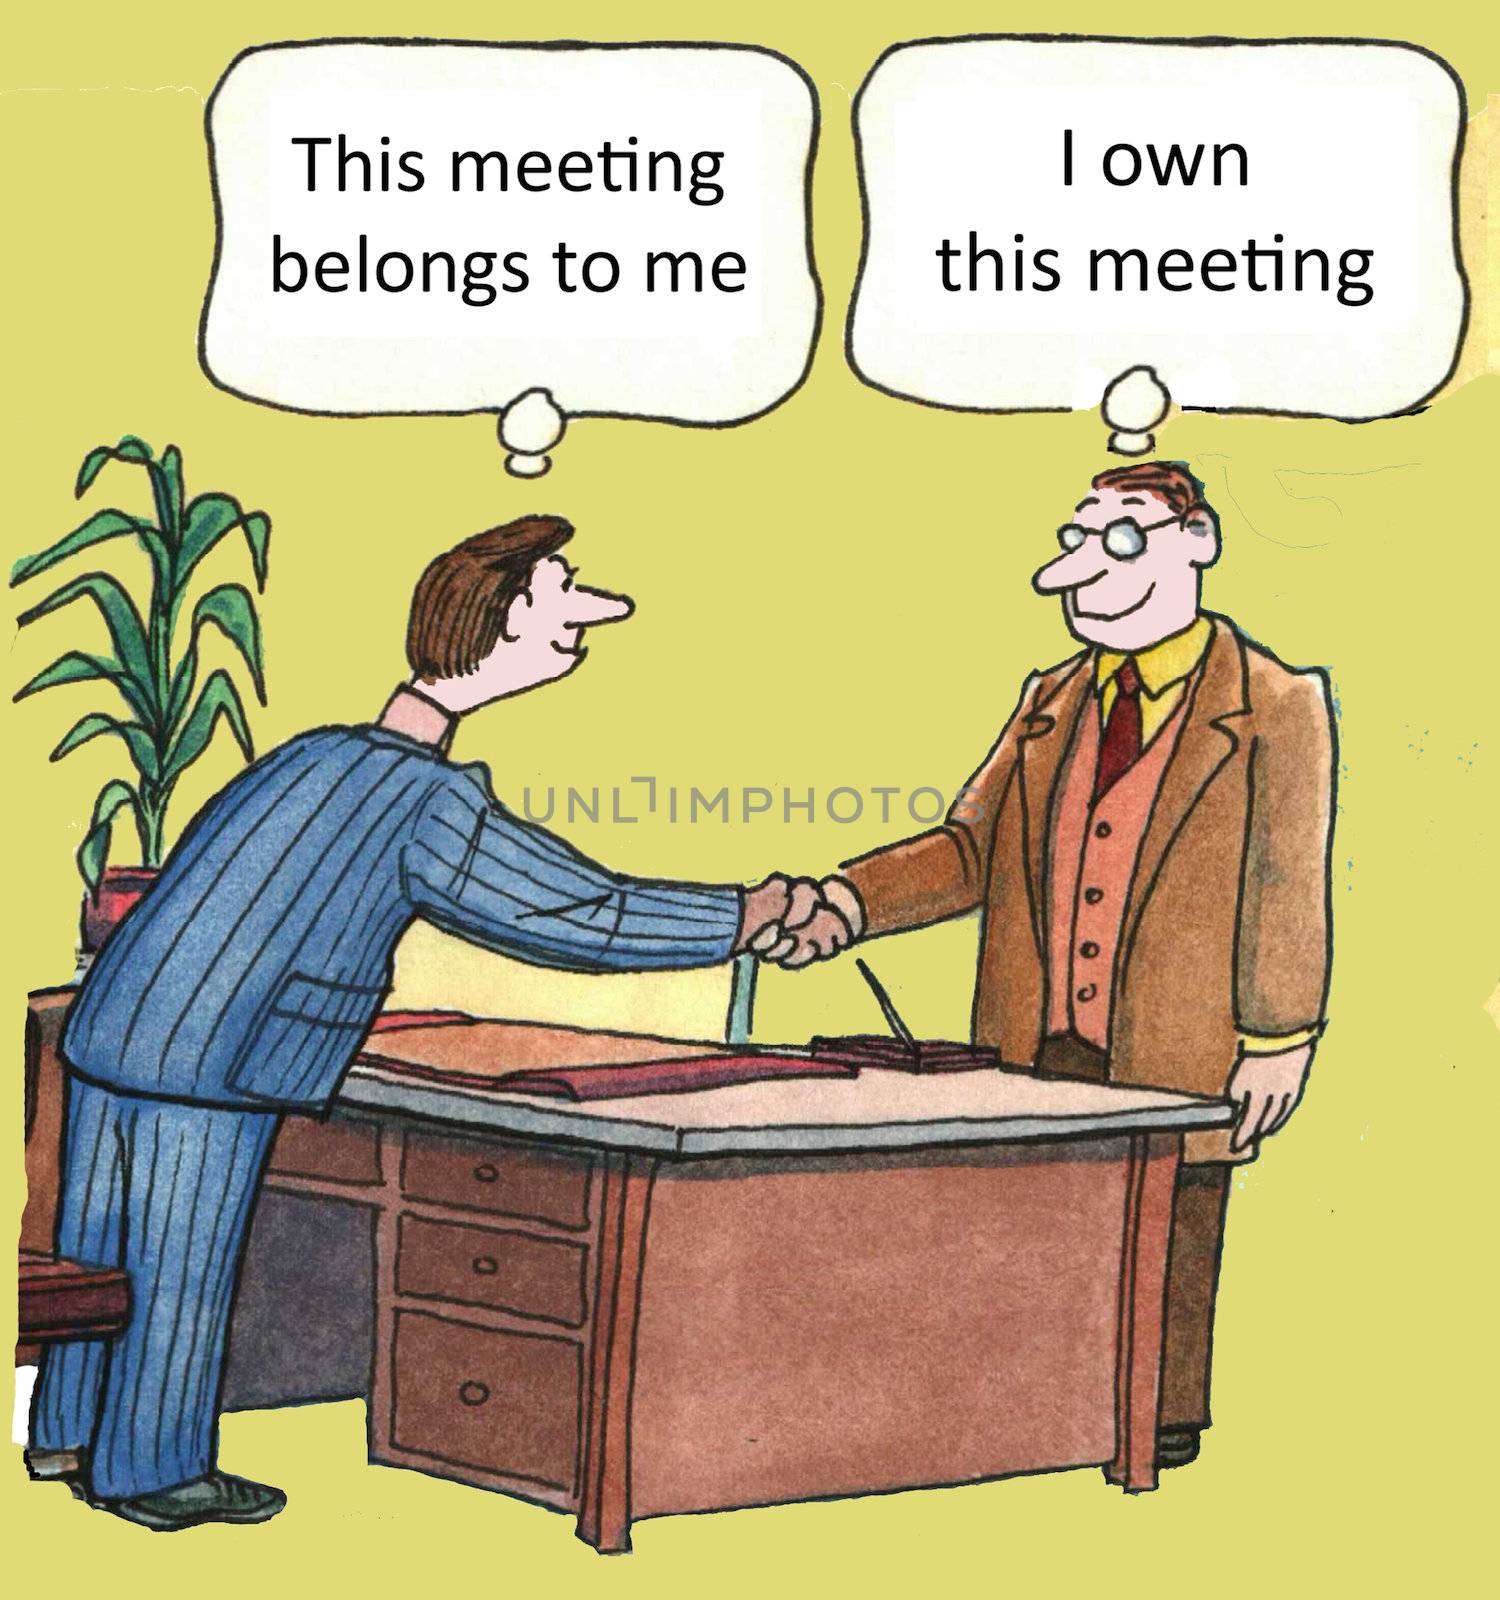 "This meeting belongs to me"  "I own this meeting"